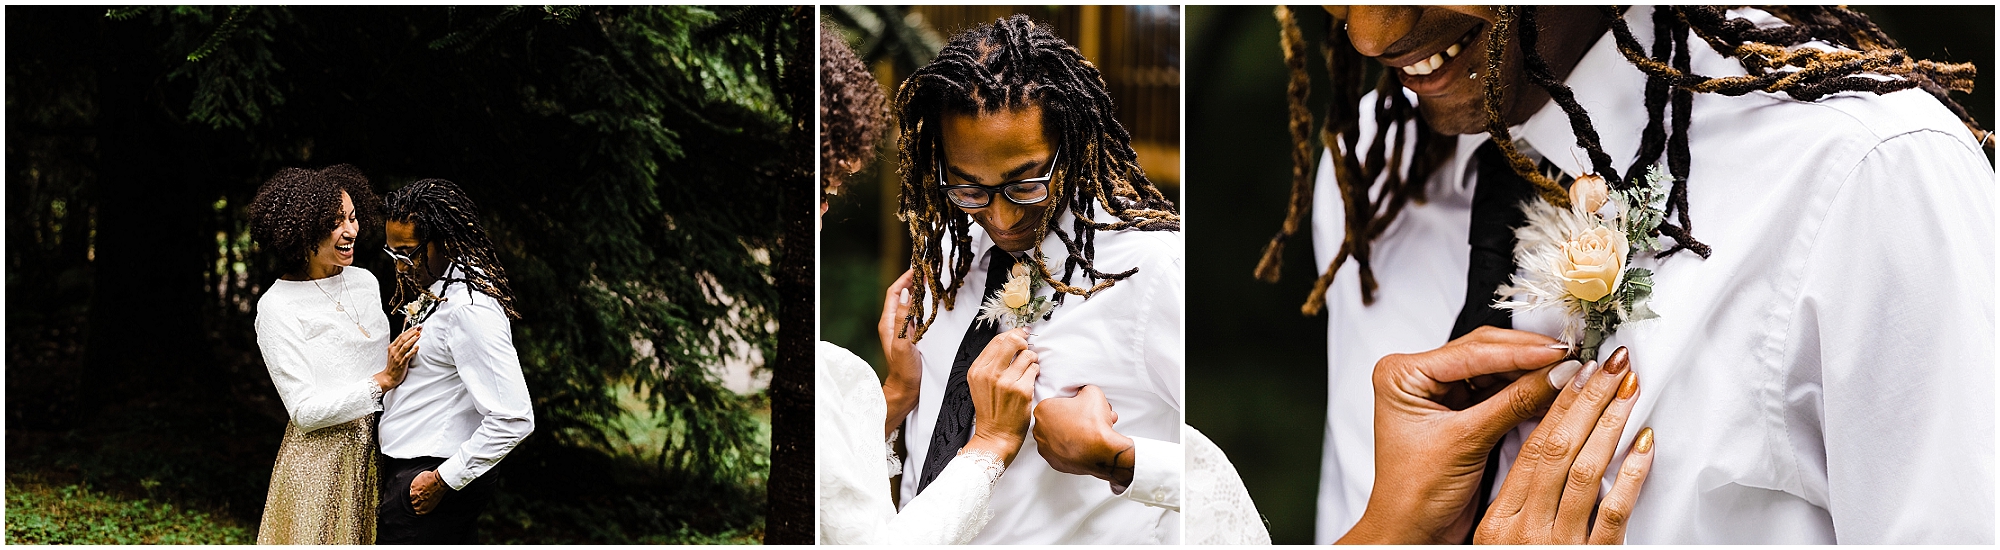 A bride pins a boutonniere made of a yellow rose and tan grasses onto her groom's white shirt for their Oregon Coast elopement at Proposal Rock in Neskowin. | Erica Swantek Photography 